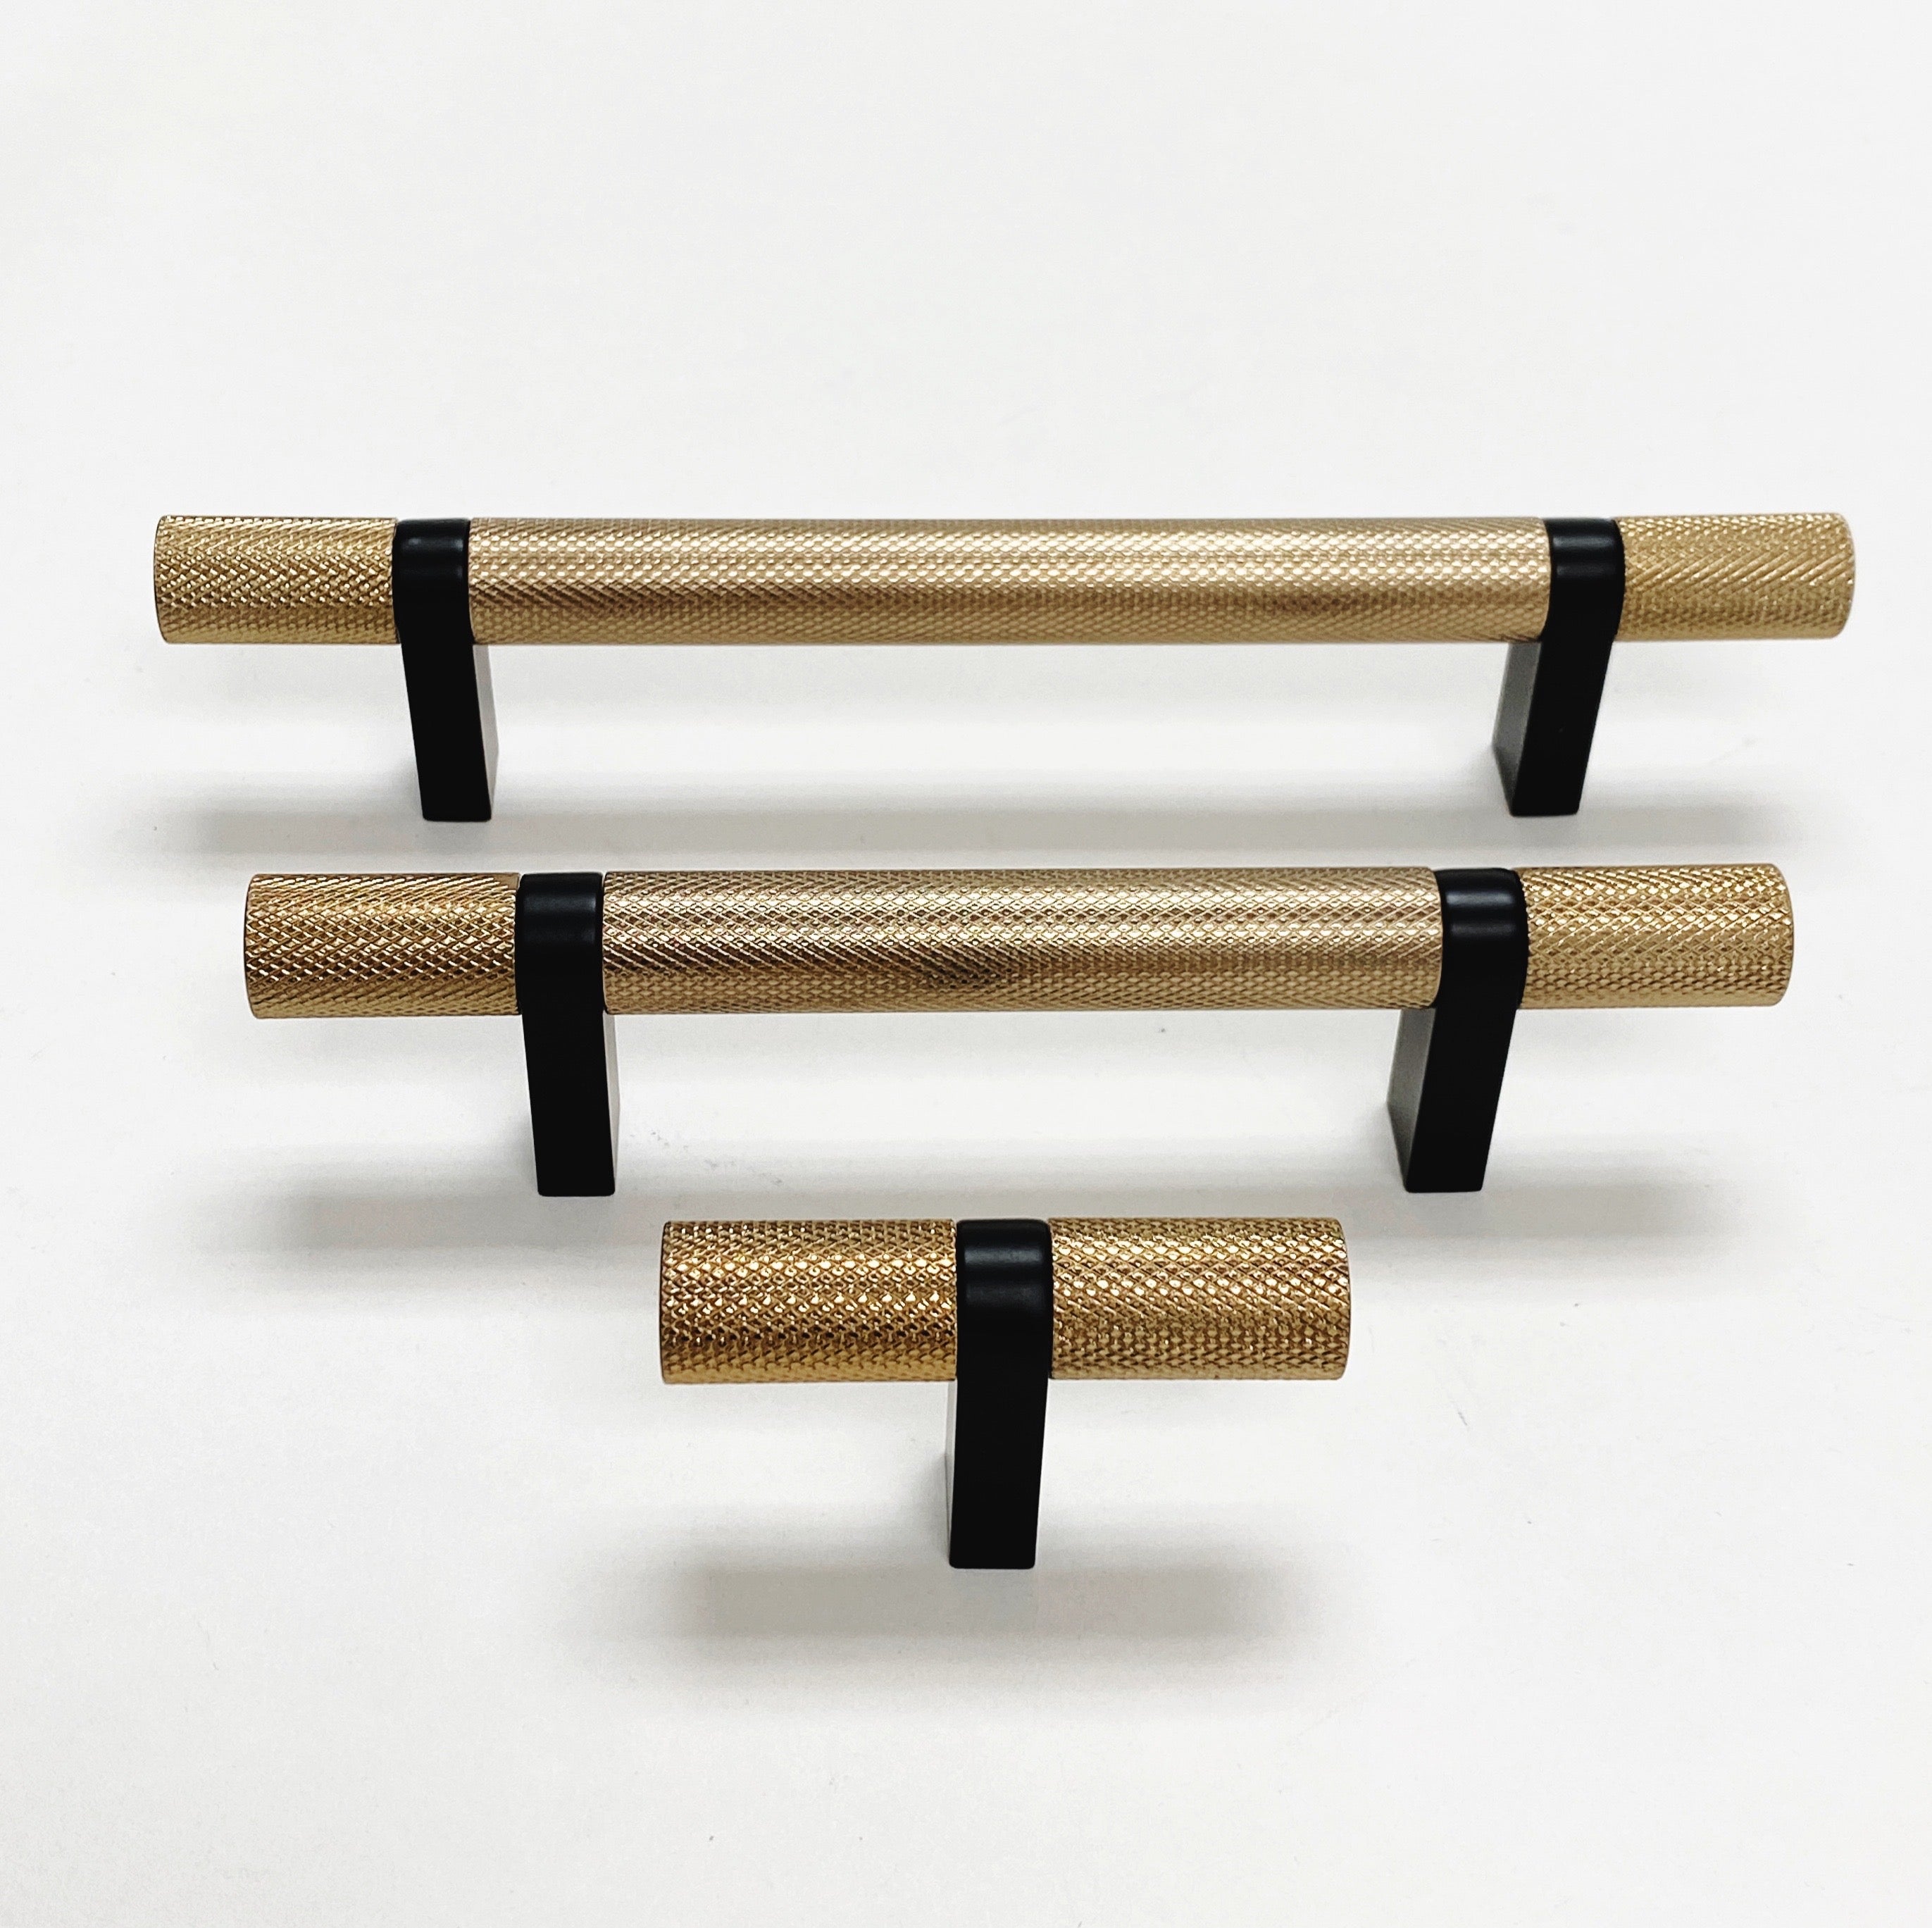 Knurled Select T-Bar Champagne Bronze and Matte Black Knobs and Pulls - Industry Hardware